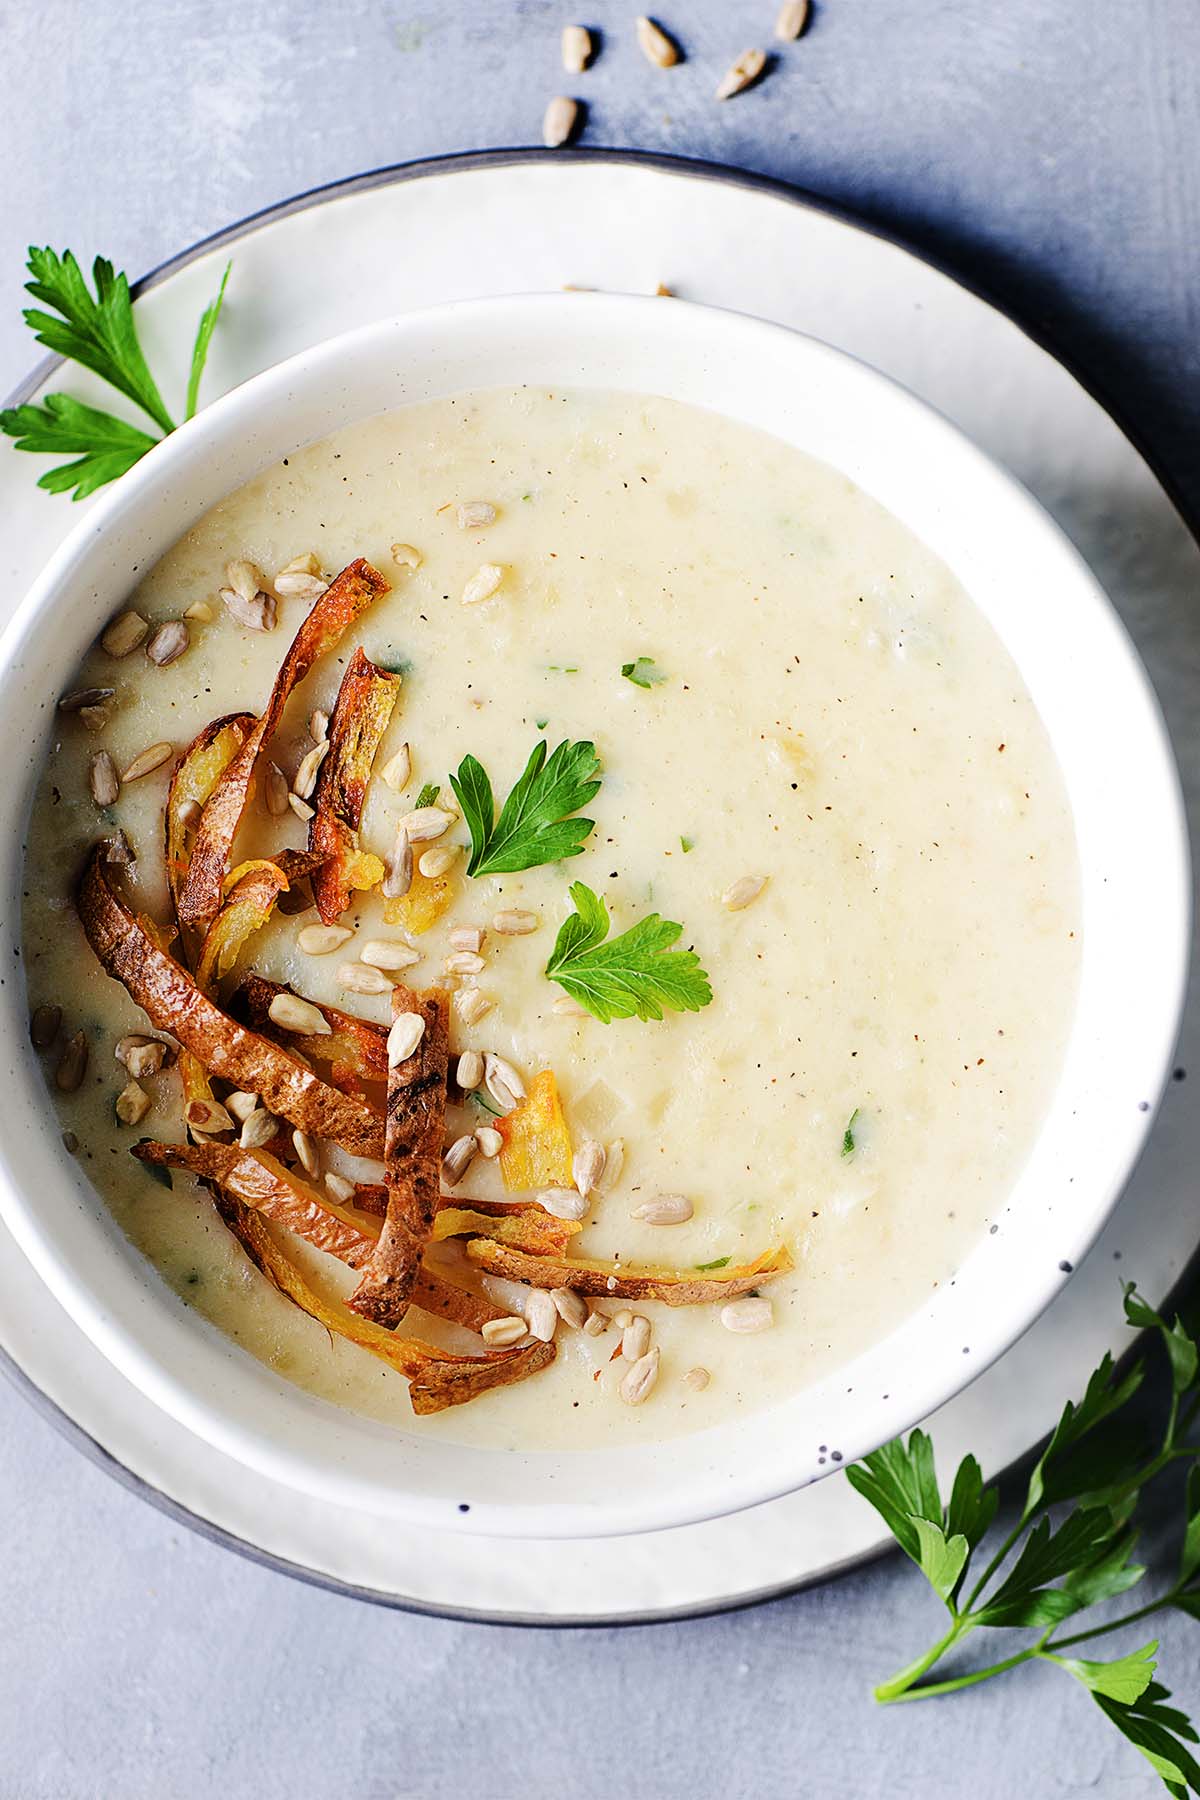 A bowl with creamy potato soup garnished with parsley and seeds.